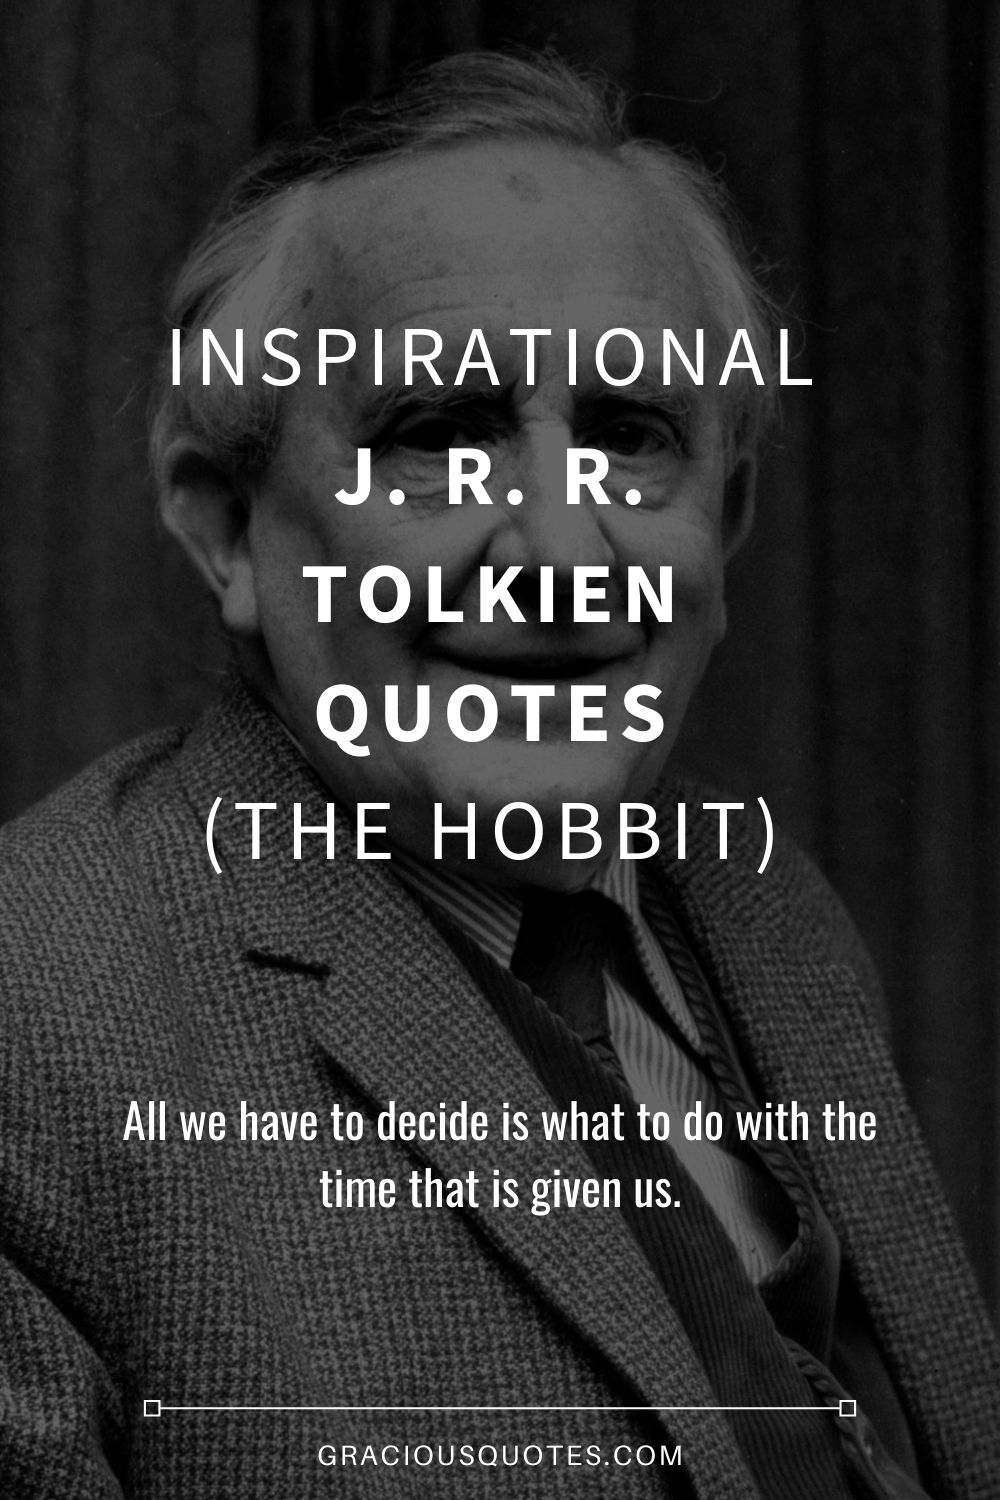 jrr tolkien quotes about god